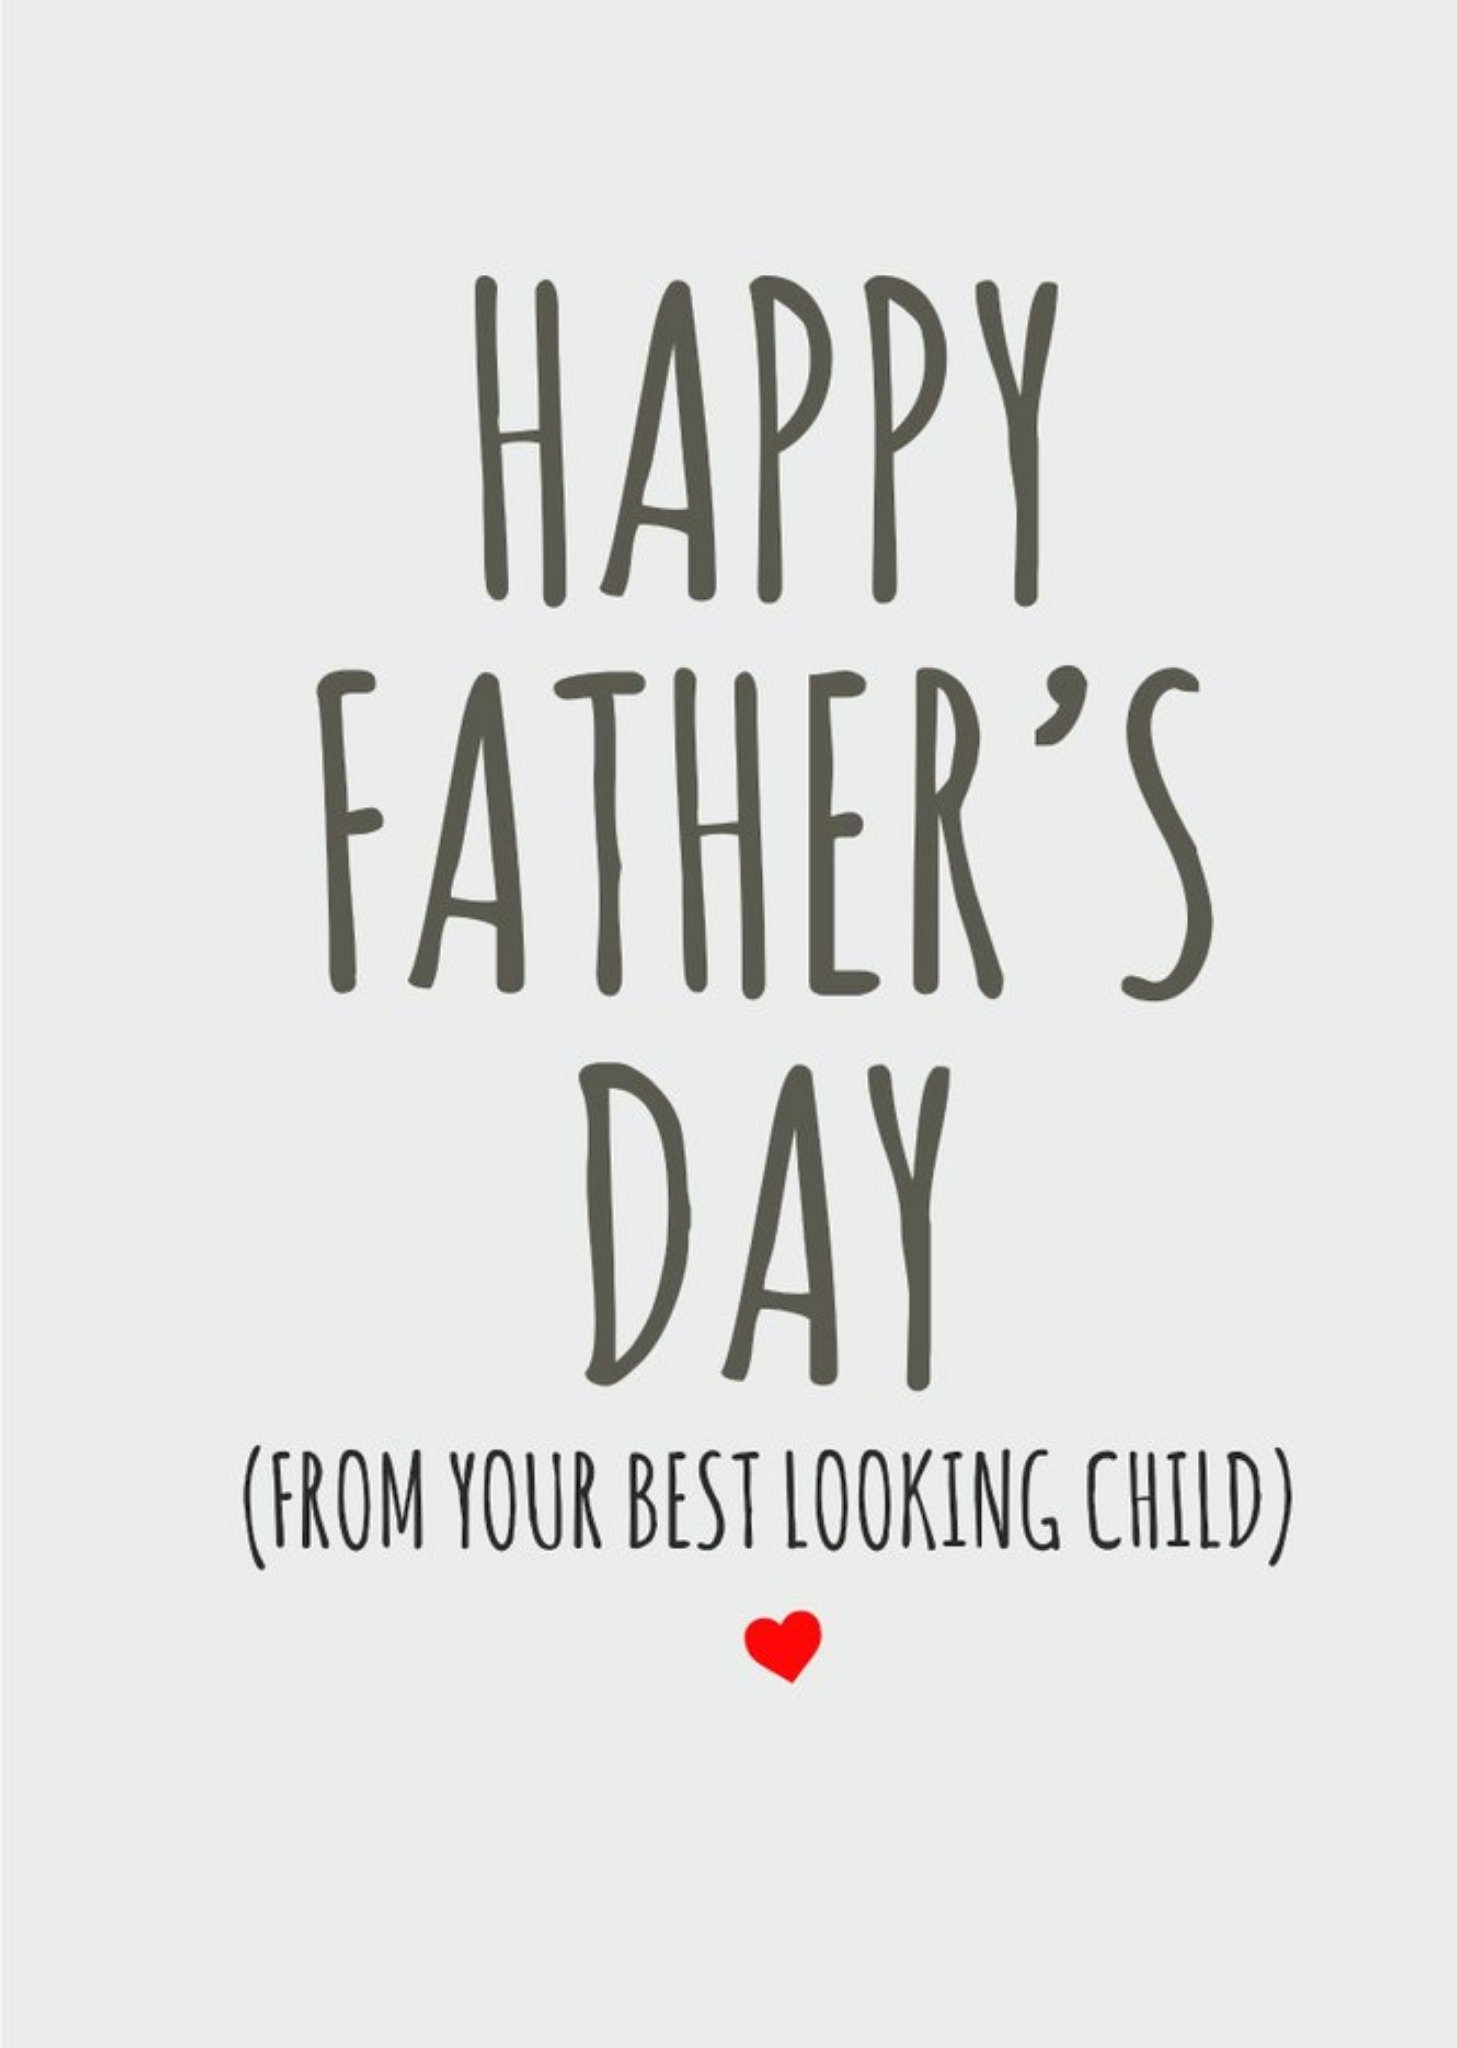 Banter King Typographical Funny Happy Fathers Day From Your Best Looking Child Card, Large